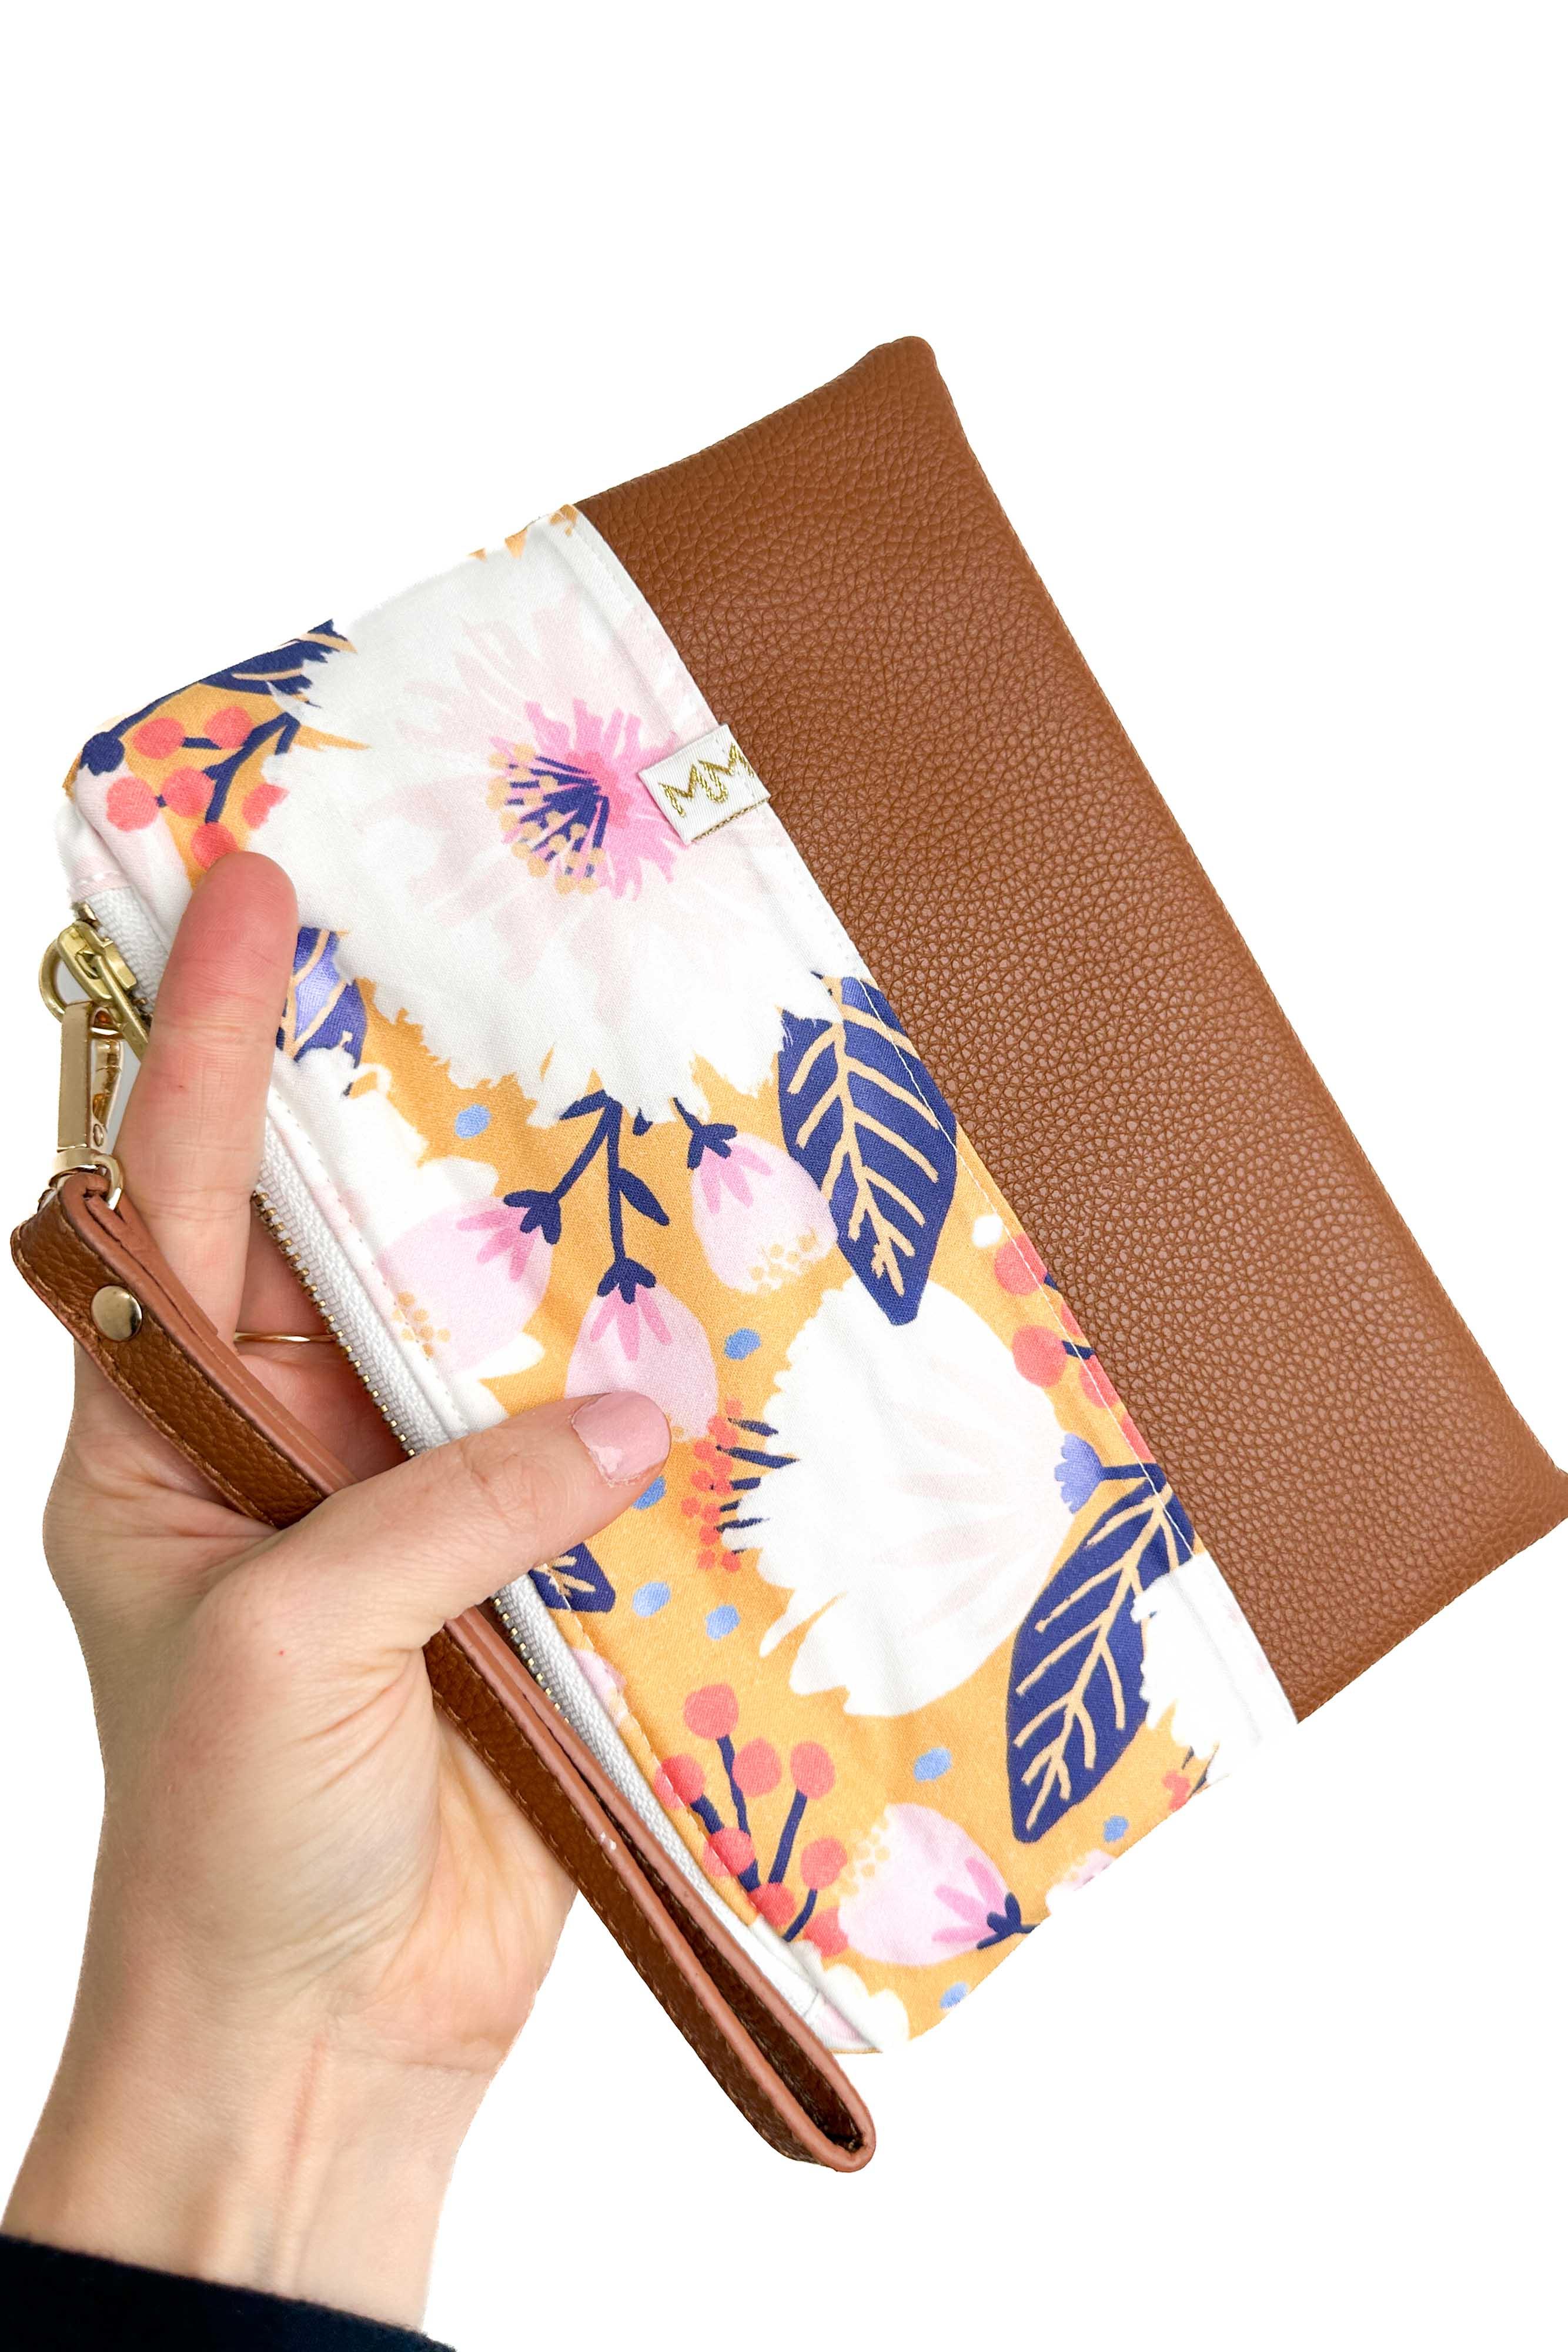 Golden Summer Convertible Crossbody Wristlet+ with Compartments READY TO SHIP - Modern Makerie